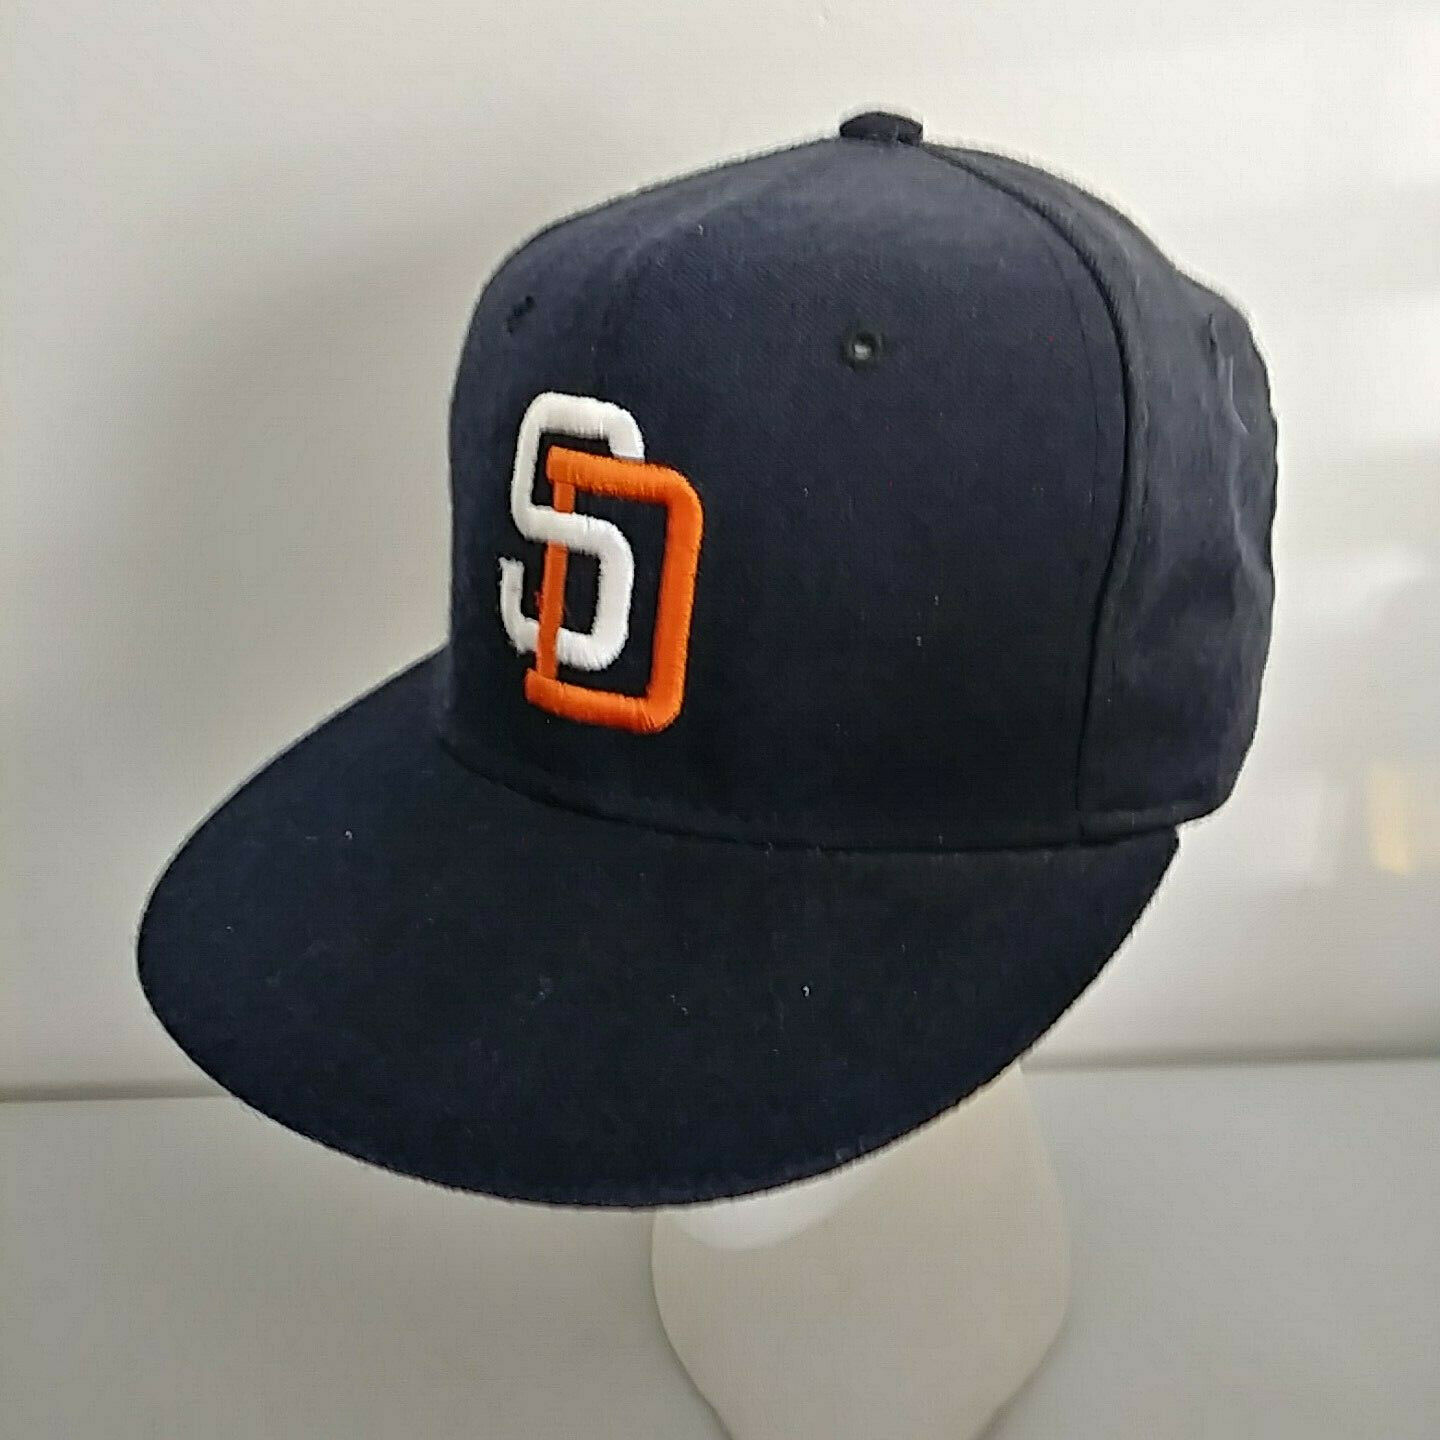 Primary image for San Diego Padres  Hat Cap New Era Pro Model Diamond Collection 6 5/8 MLB Vintage